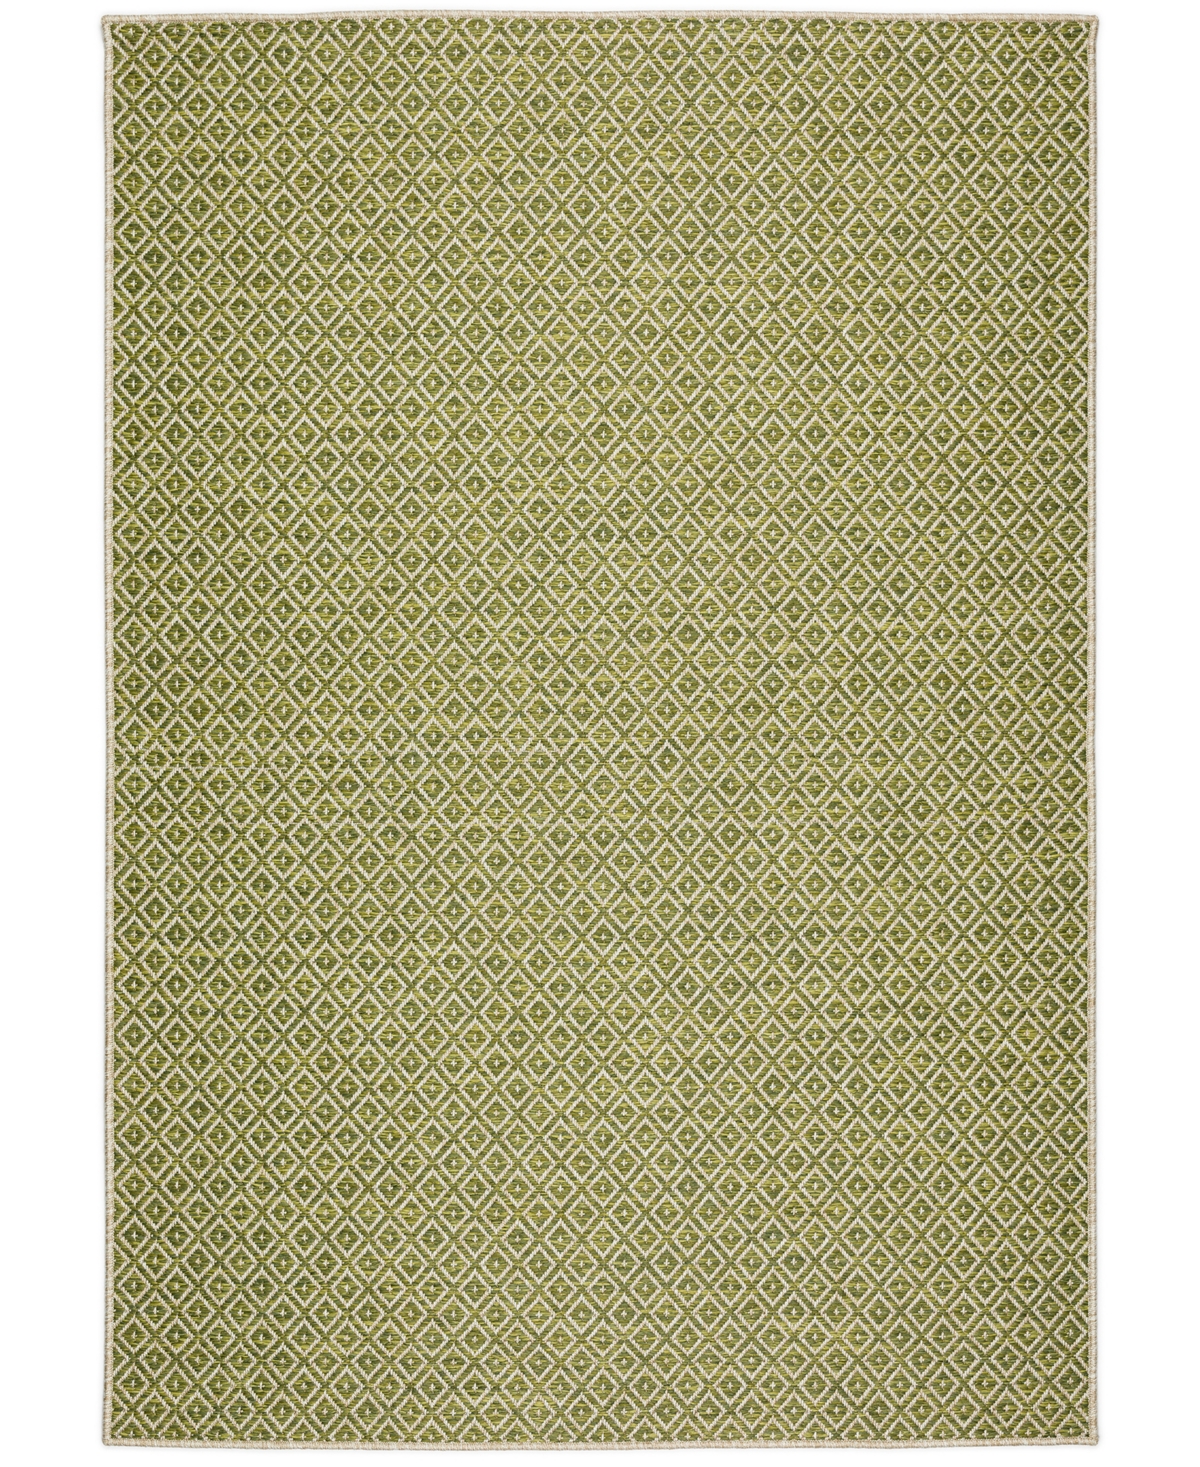 D Style Nusa Outdoor Nsa8 12' X 15' Area Rug In Lime